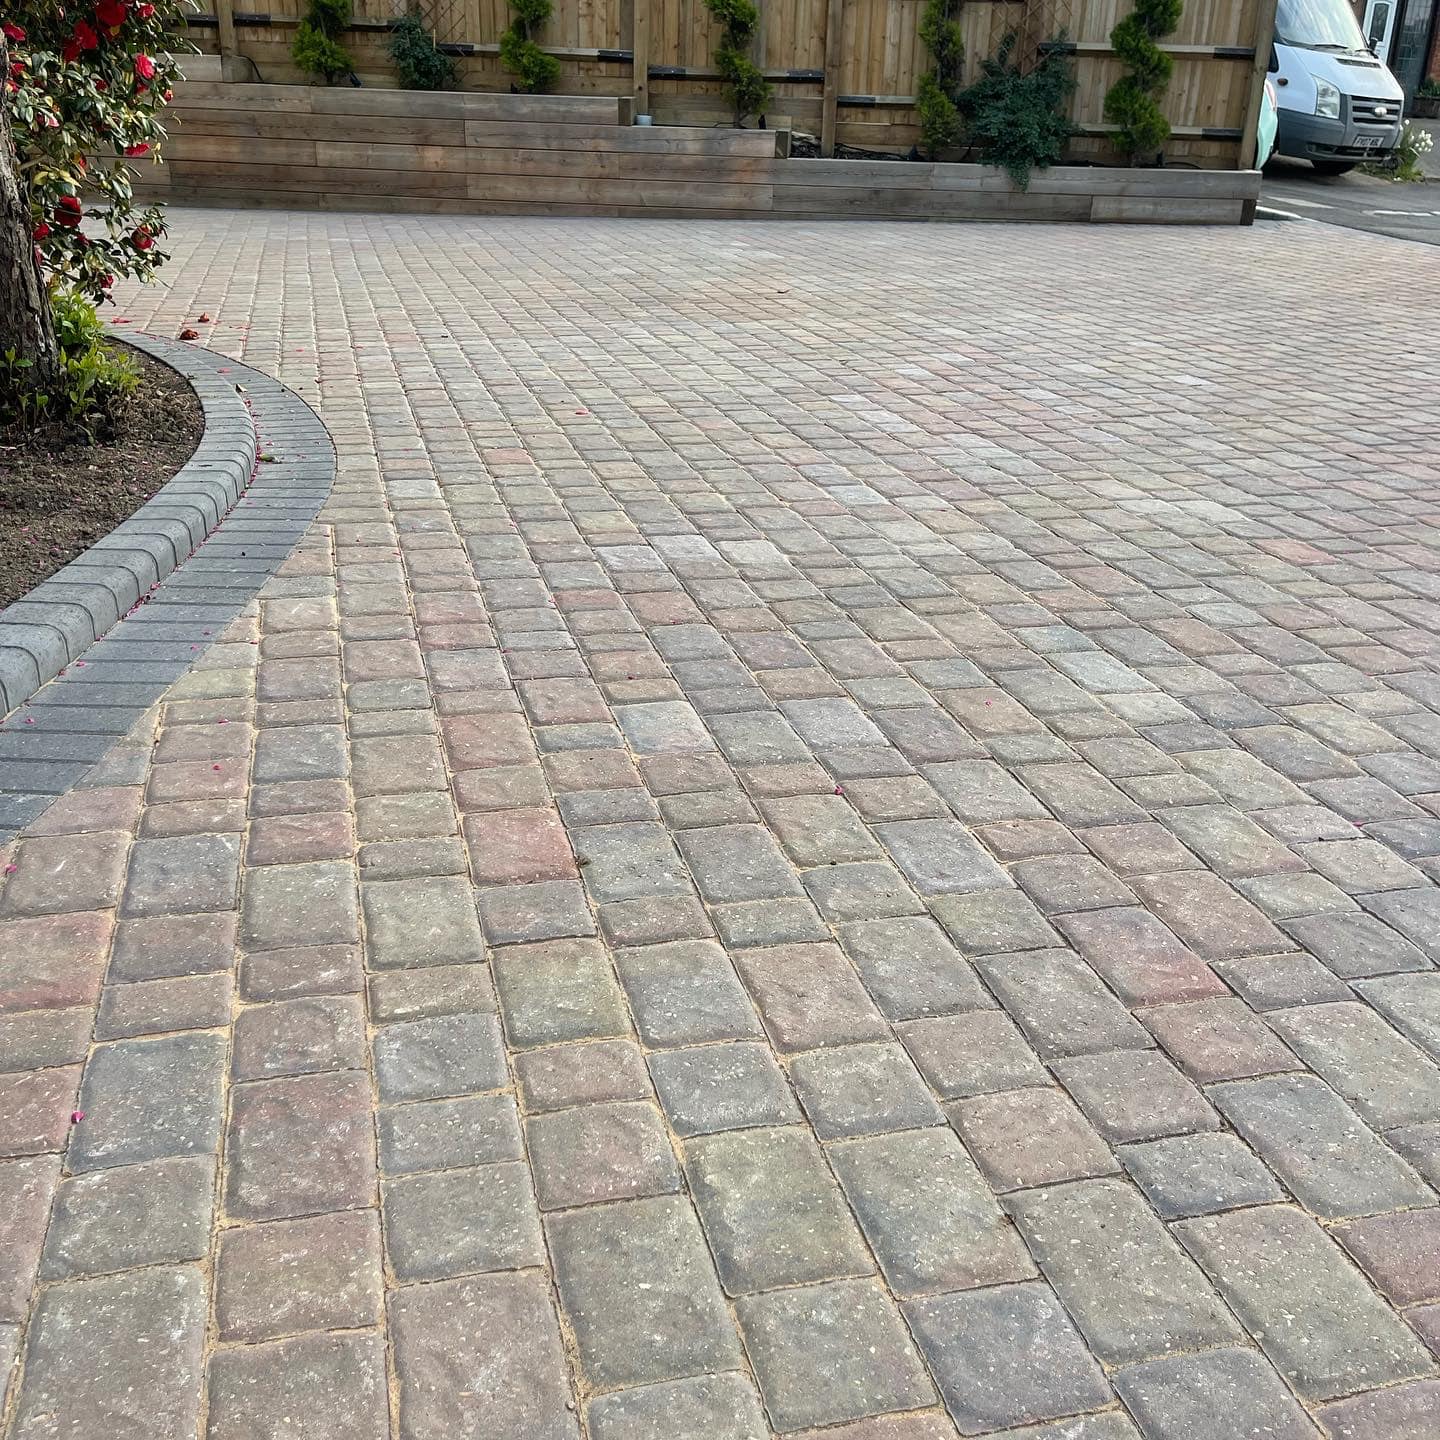 Is block paving great for my driveway?